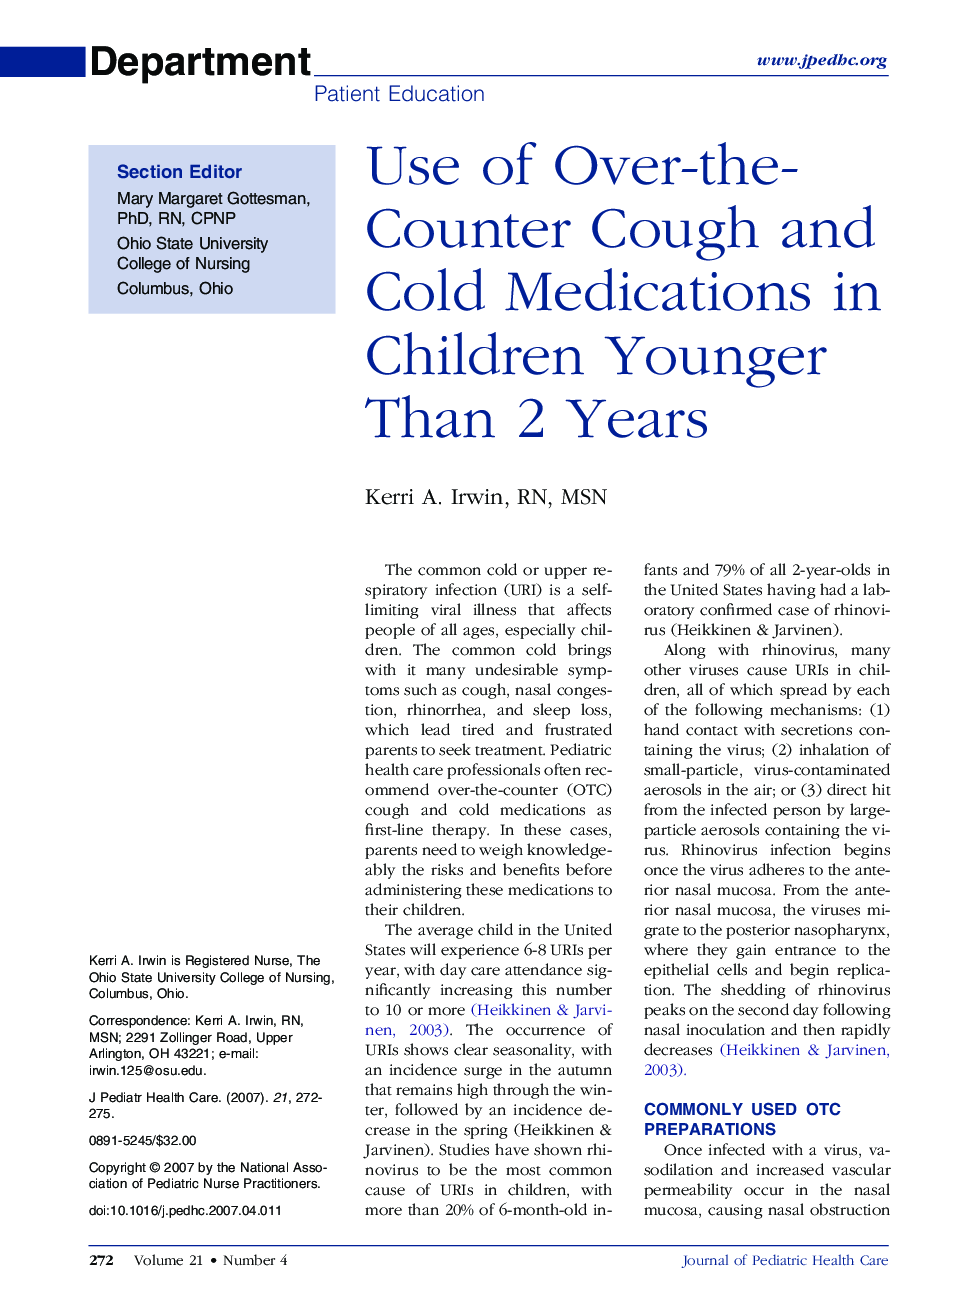 Use of Over-the-Counter Cough and Cold Medications in Children Younger Than 2 Years